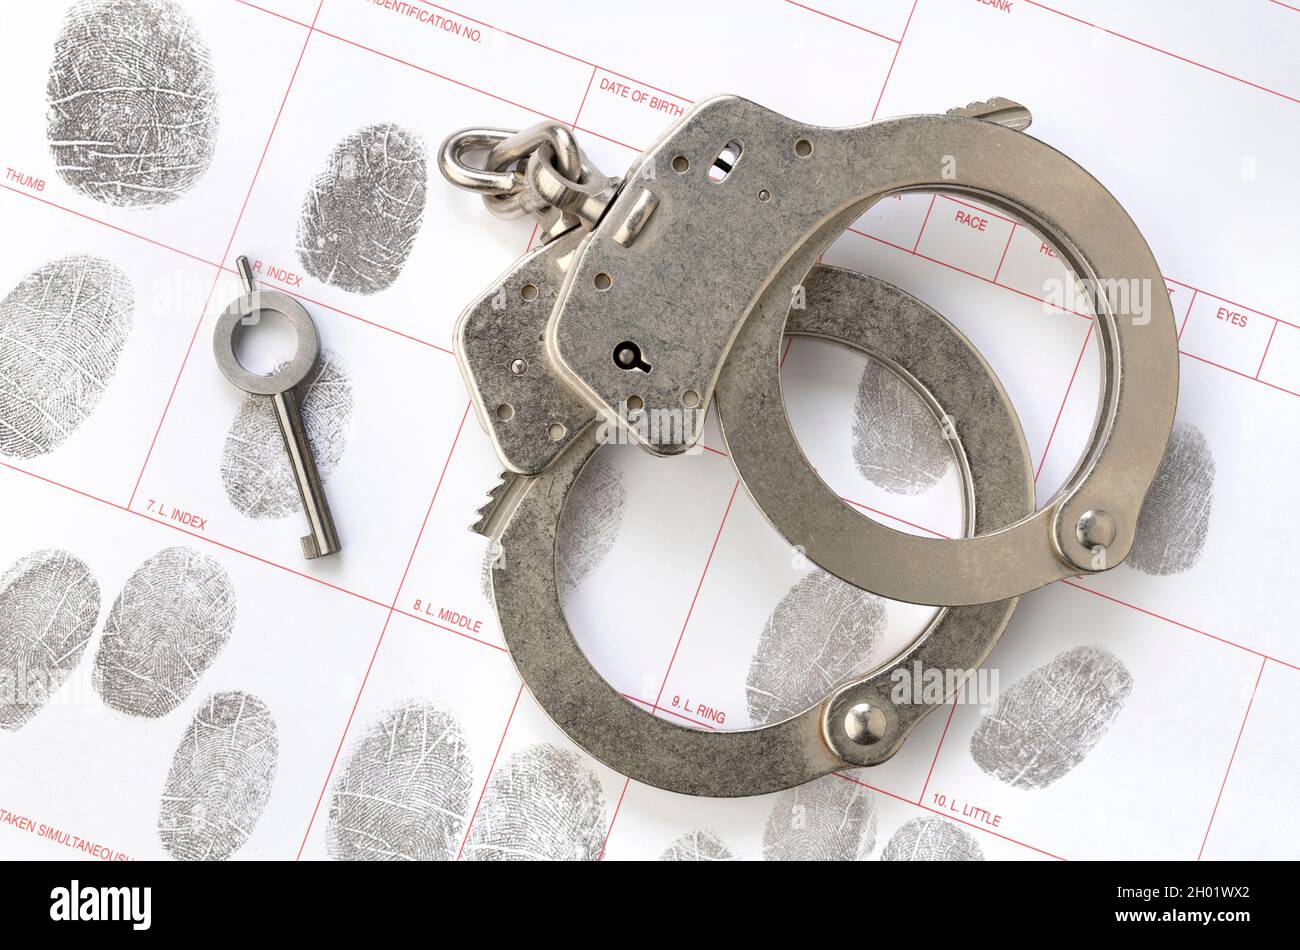 A pair of handcuffs and its key rest atop a fingerprint identification booking card, inferring crime, accountability, punishment and law enforcement. Stock Photo